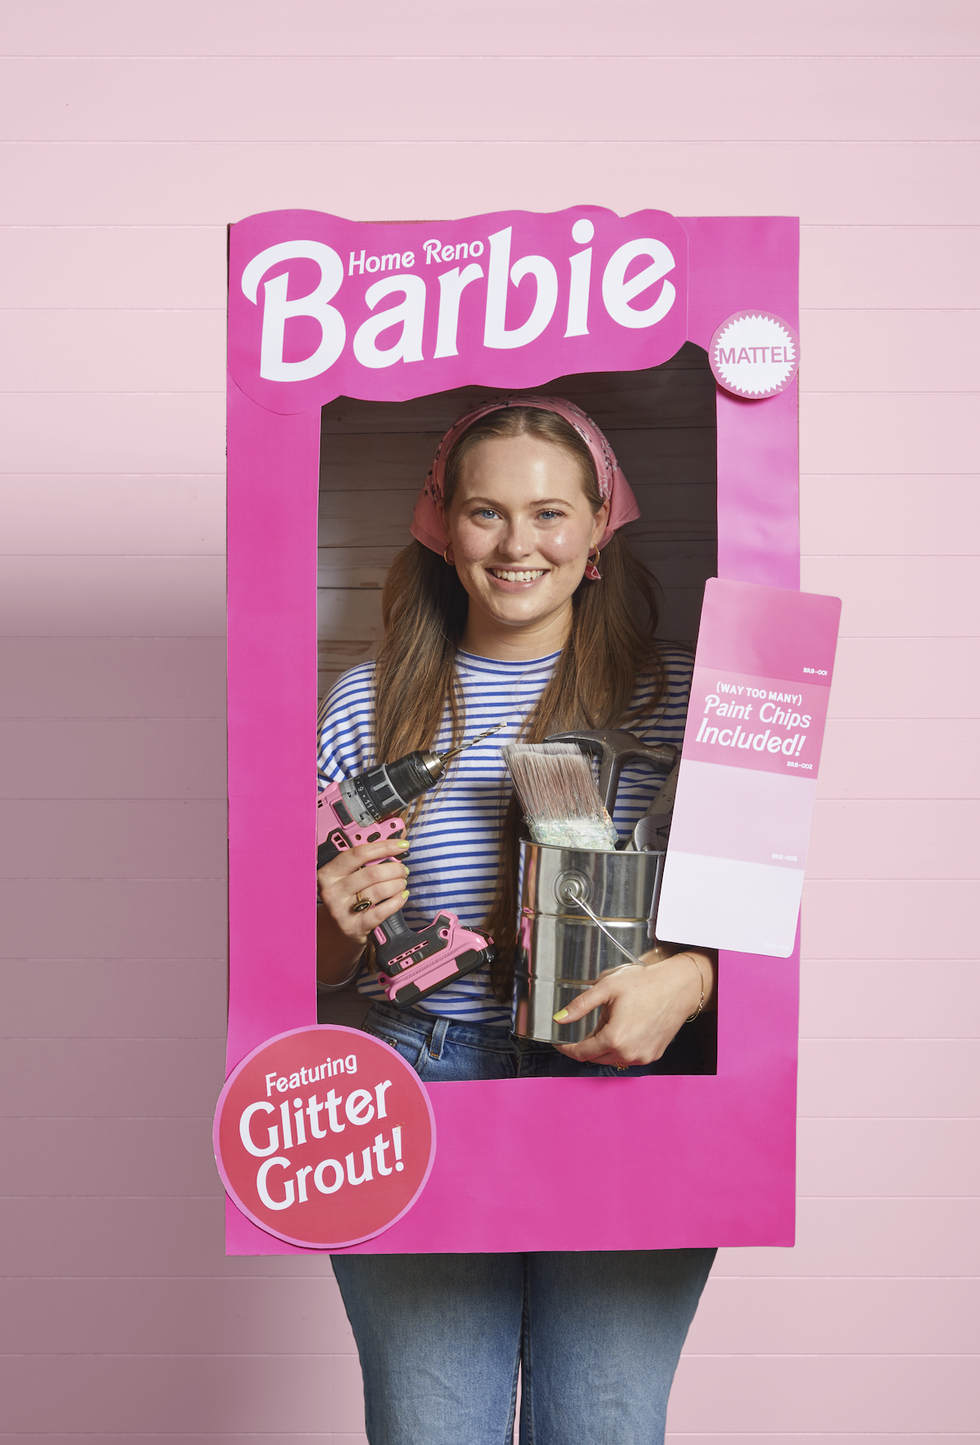 home reno barbie halloween costume featuring a woman wearing a pink box and holding paint swatches and a paint can